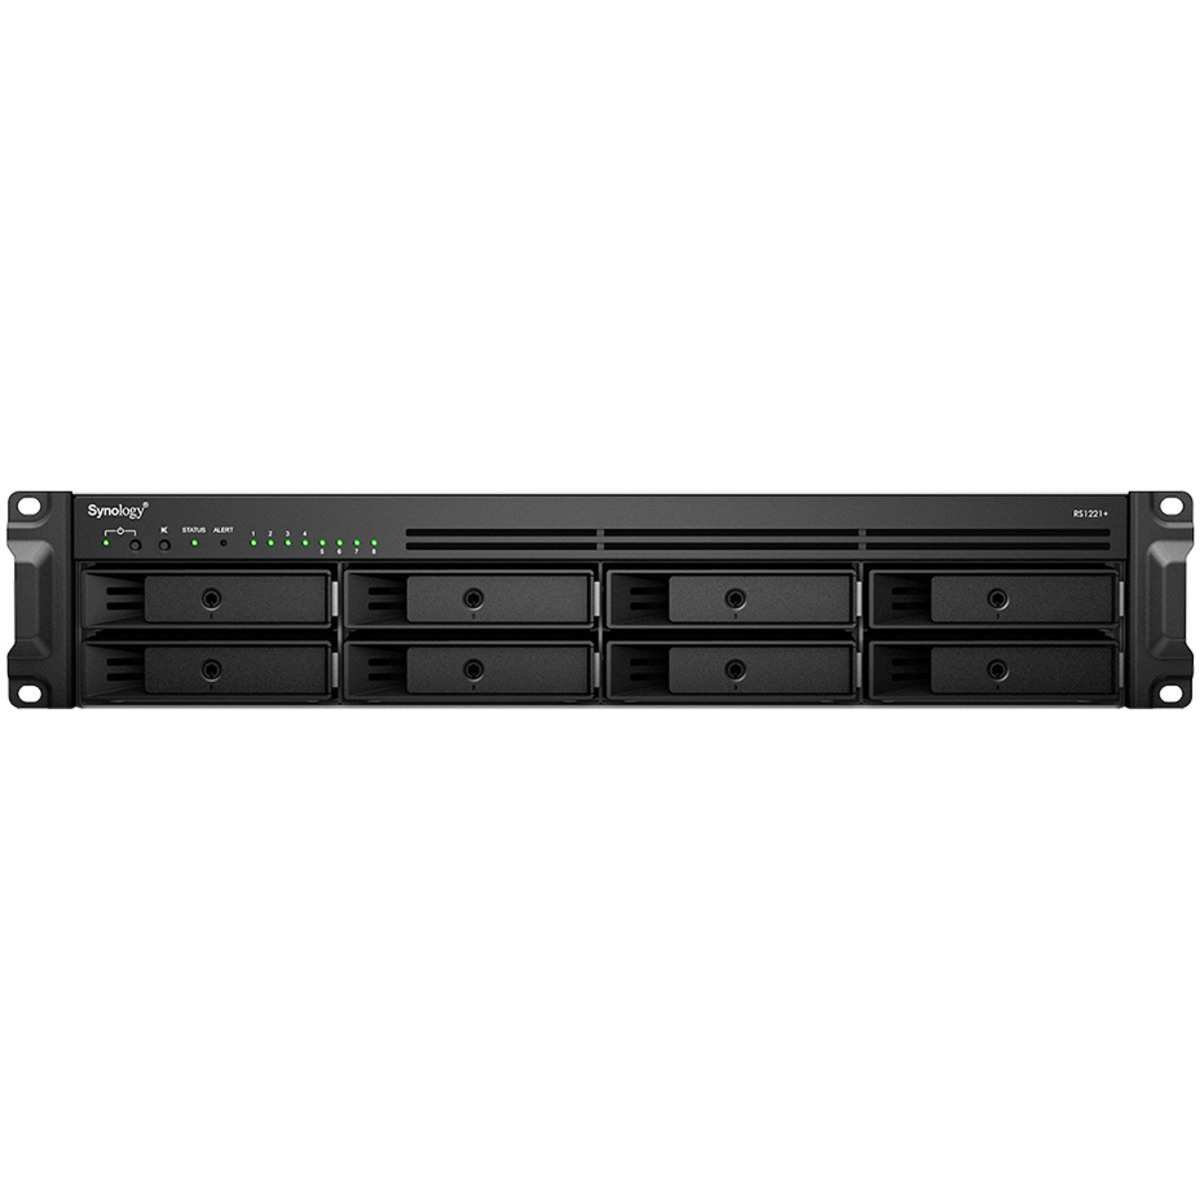 Synology RackStation RS1221RP+ 20tb 8-Bay RackMount Multimedia / Power User / Business NAS - Network Attached Storage Device 5x4tb Seagate IronWolf ST4000VN006 3.5 5400rpm SATA 6Gb/s HDD NAS Class Drives Installed - Burn-In Tested - FREE RAM UPGRADE RackStation RS1221RP+